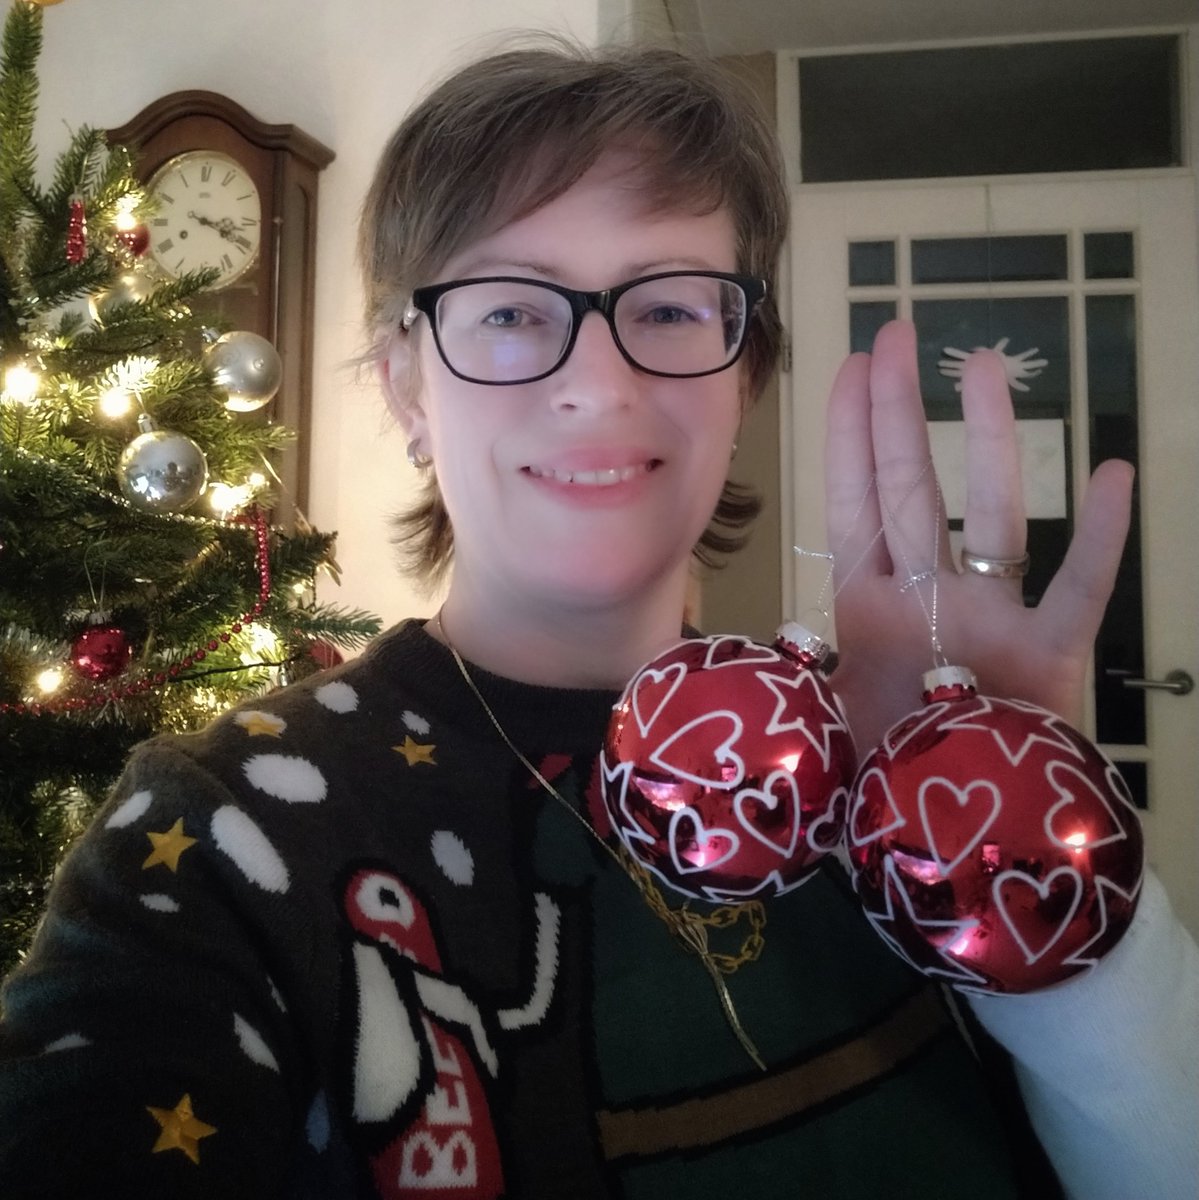 It's December #CheckYerBawballs challenge time !!! So guys, be wise and check the pack once a month or maybe twice. I'm supporting @RitchieMarshall and @CahonasScotland to raise awareness on testicular cancer and early detection by performing regular self-checks. #CheckOneTwo